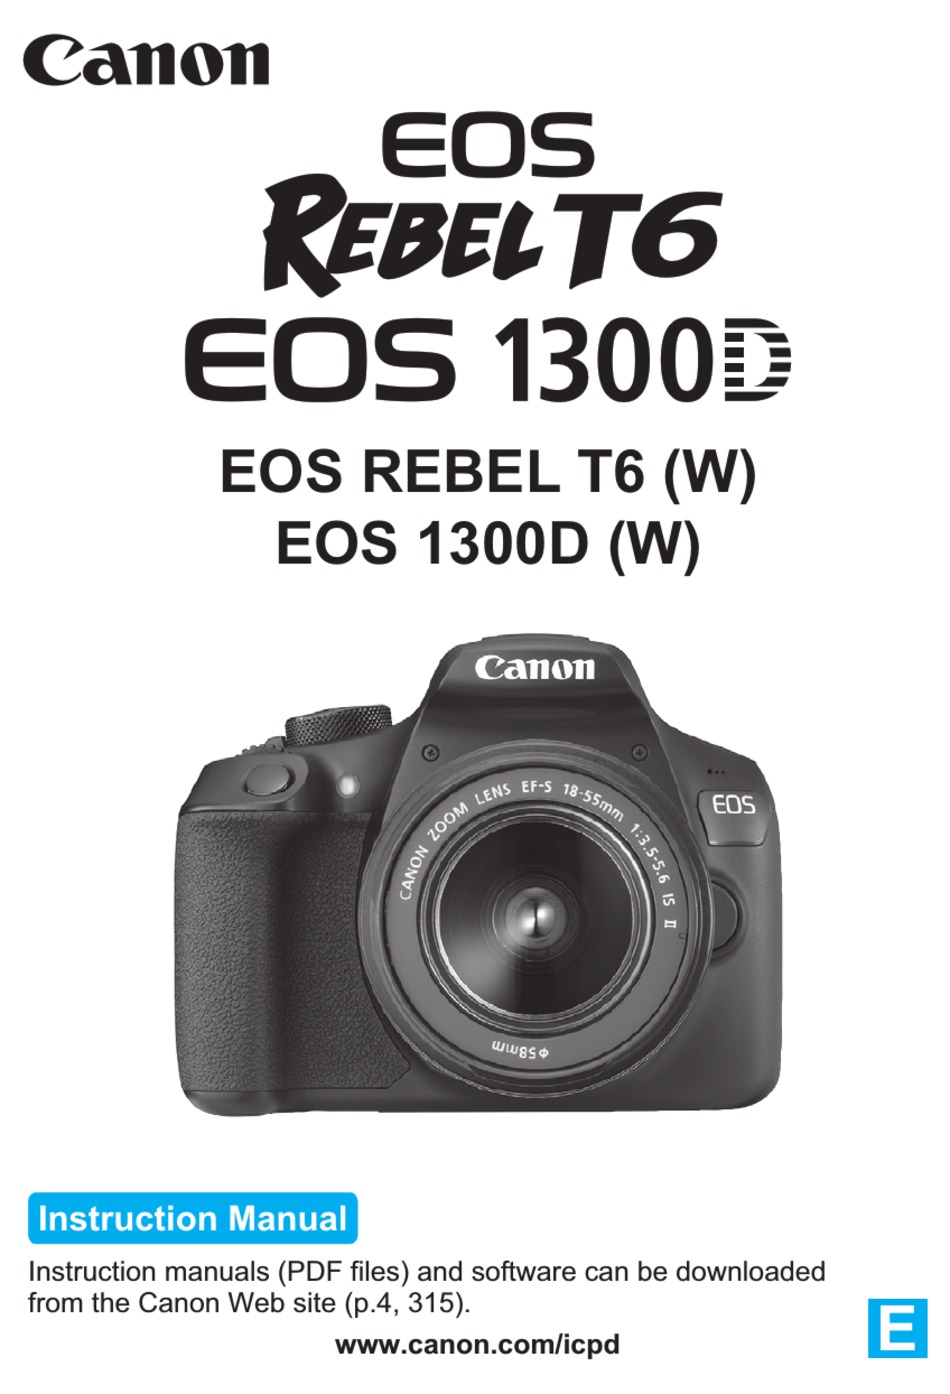 canon eos rebel t6i connect app for mac